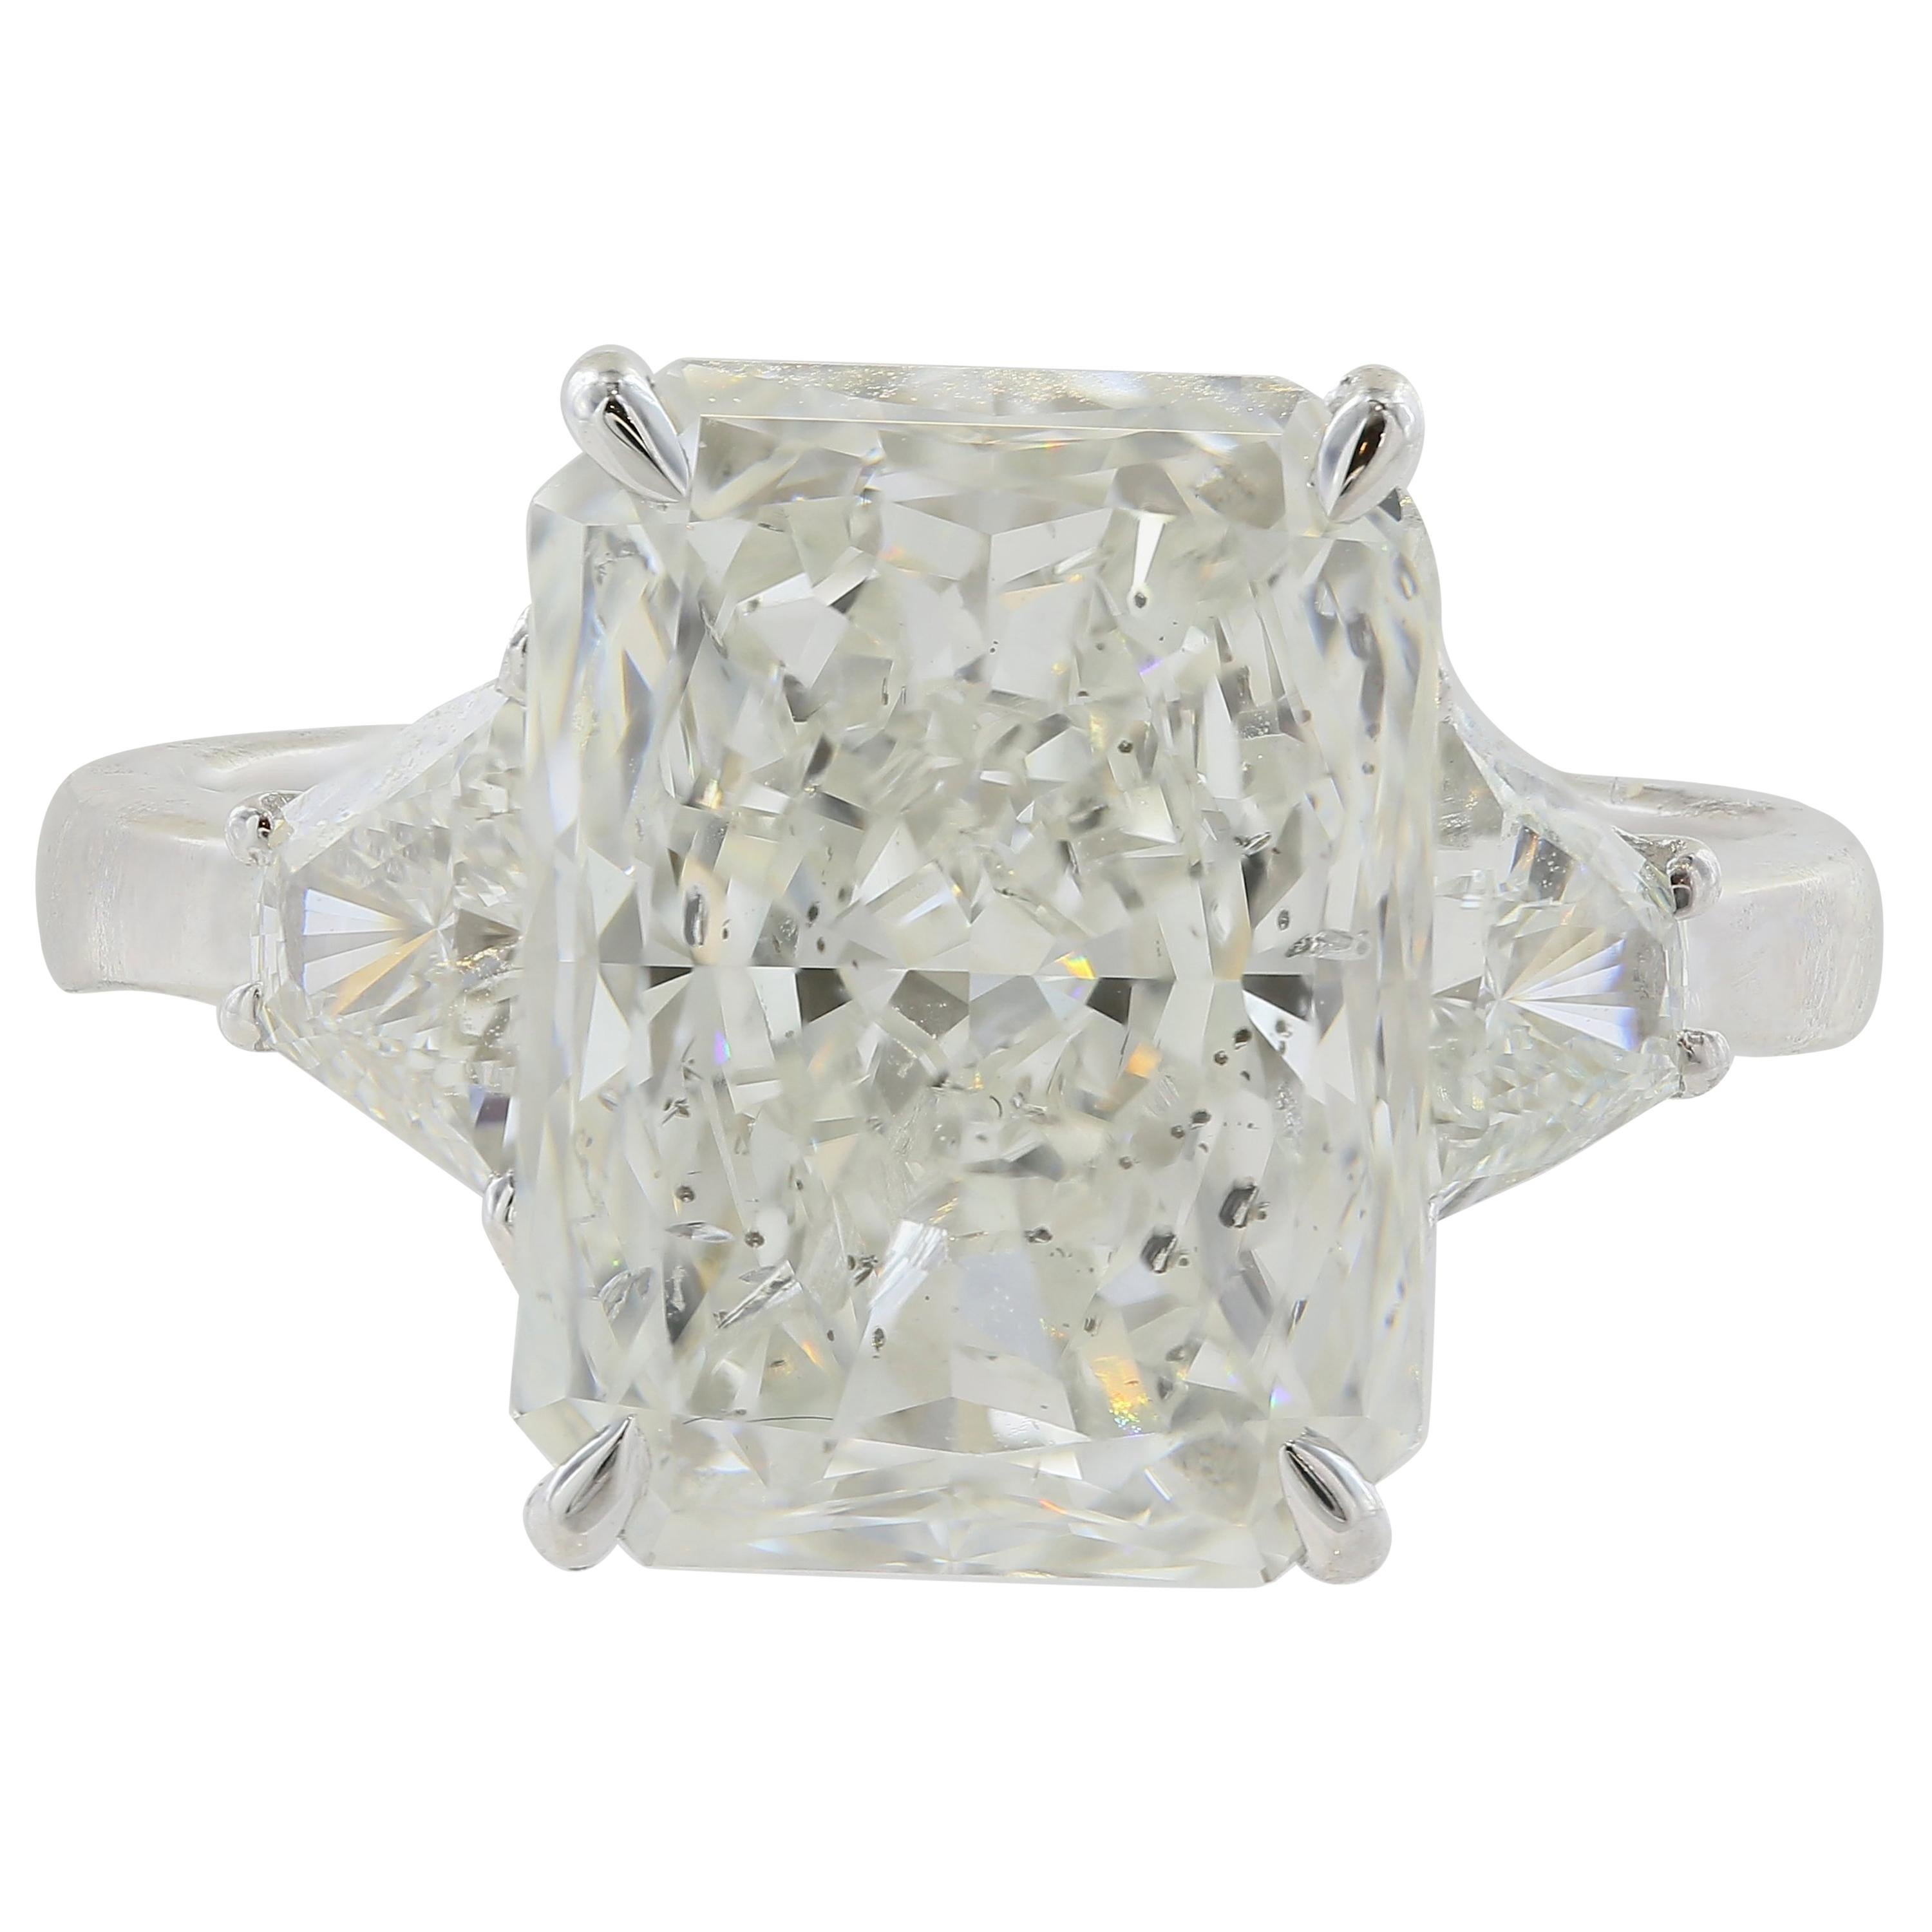 GIA Certified 5.03 Carat Radiant Cut Diamond Ring For Sale